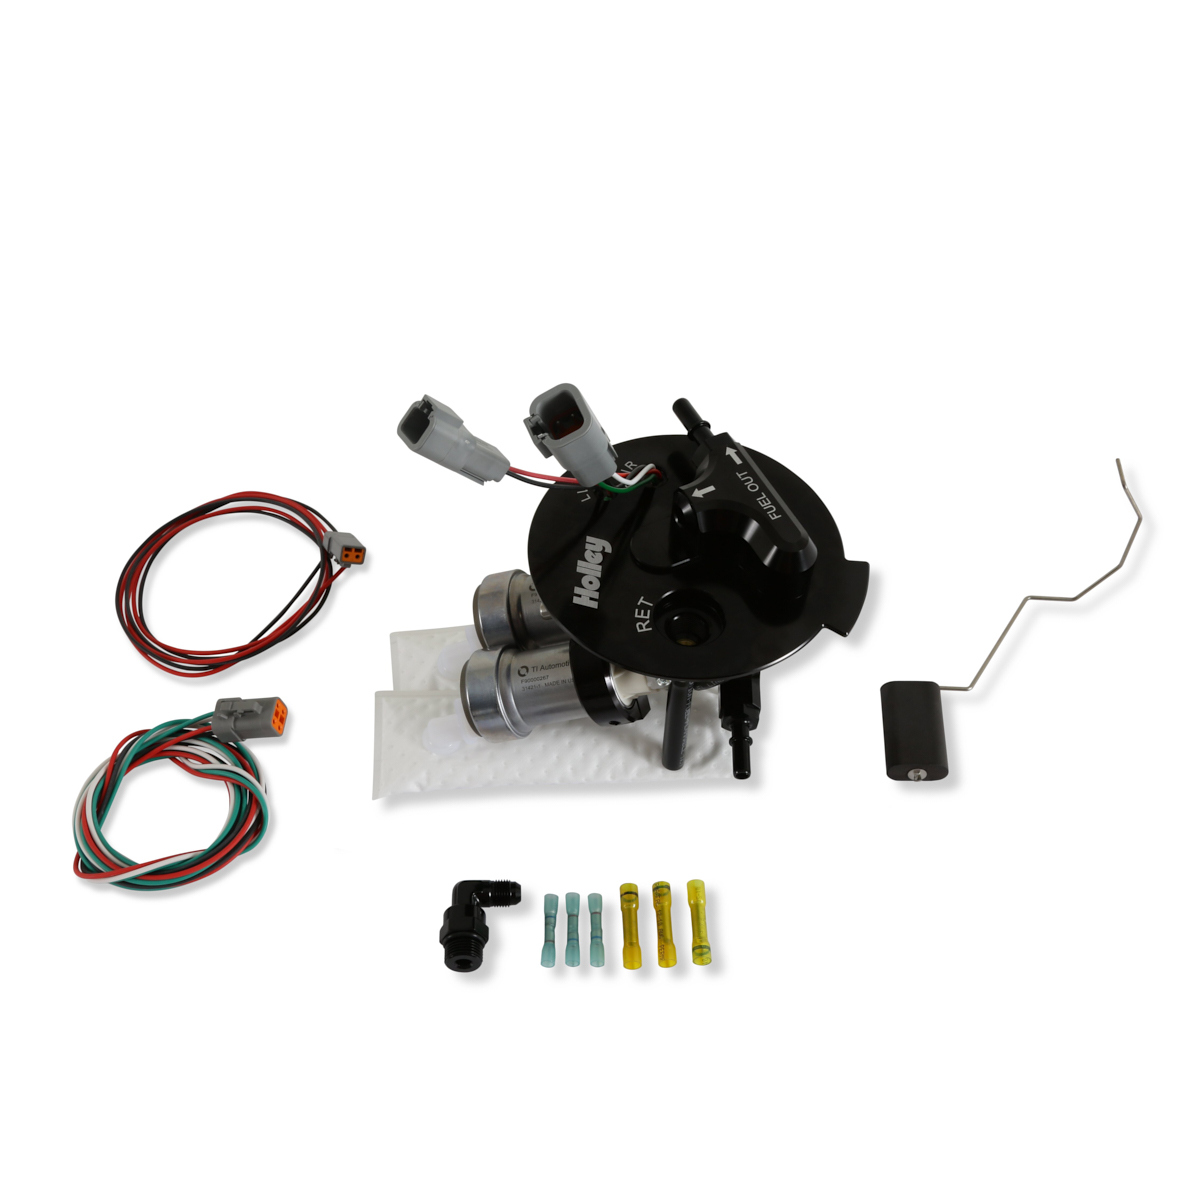 Holley 12-351 Fuel Pump, Electric, Dual 450 lph Pumps, Install Kit, Chevy Camaro 2010-15, Kit